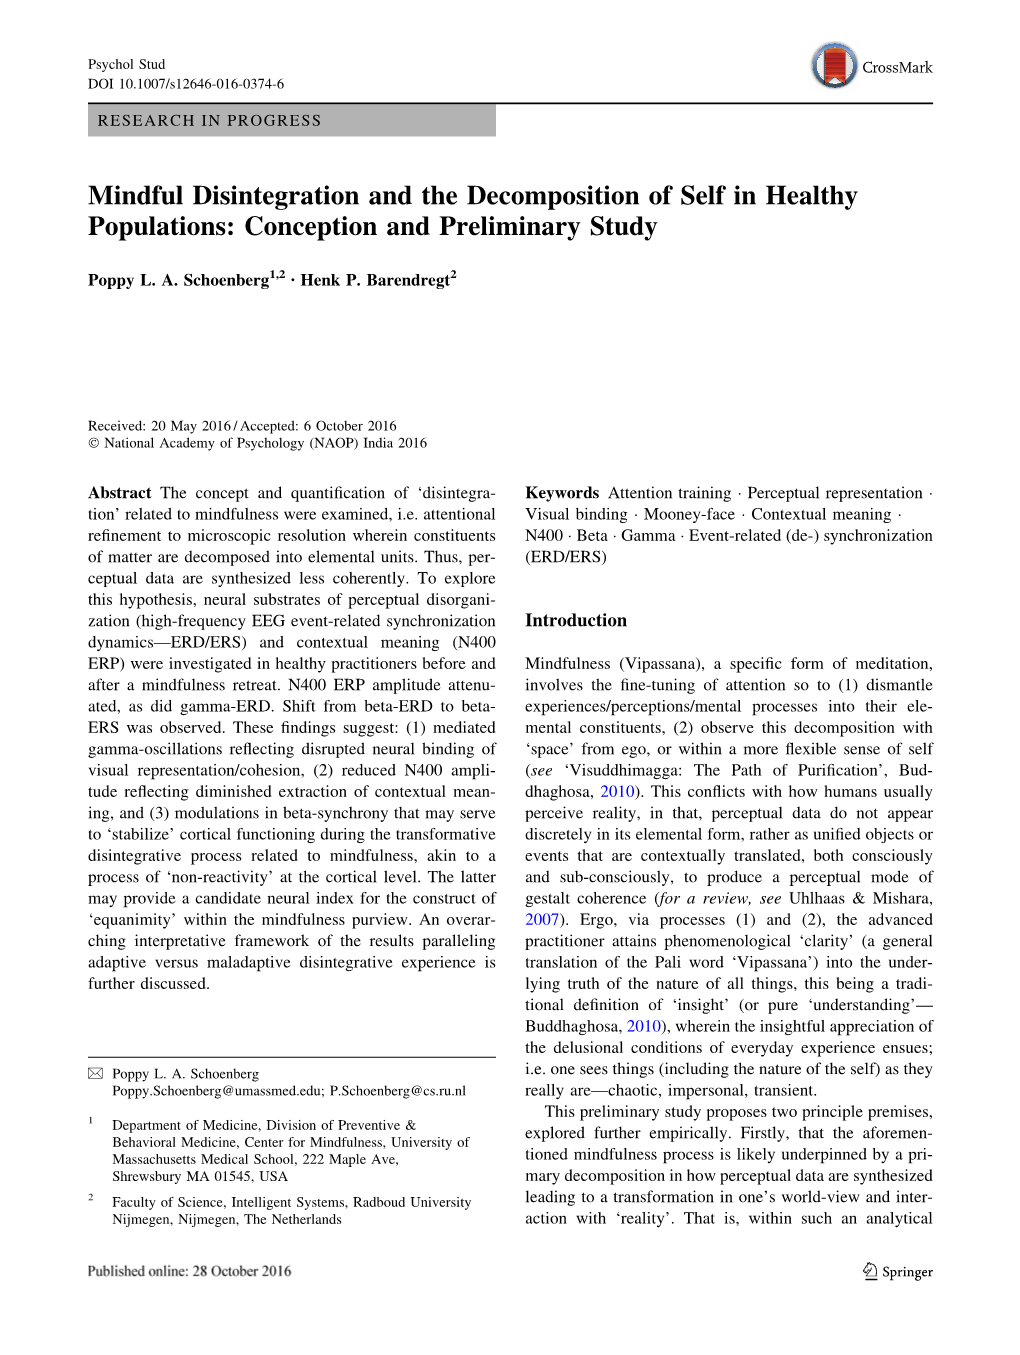 Mindful Disintegration and the Decomposition of Self in Healthy Populations: Conception and Preliminary Study